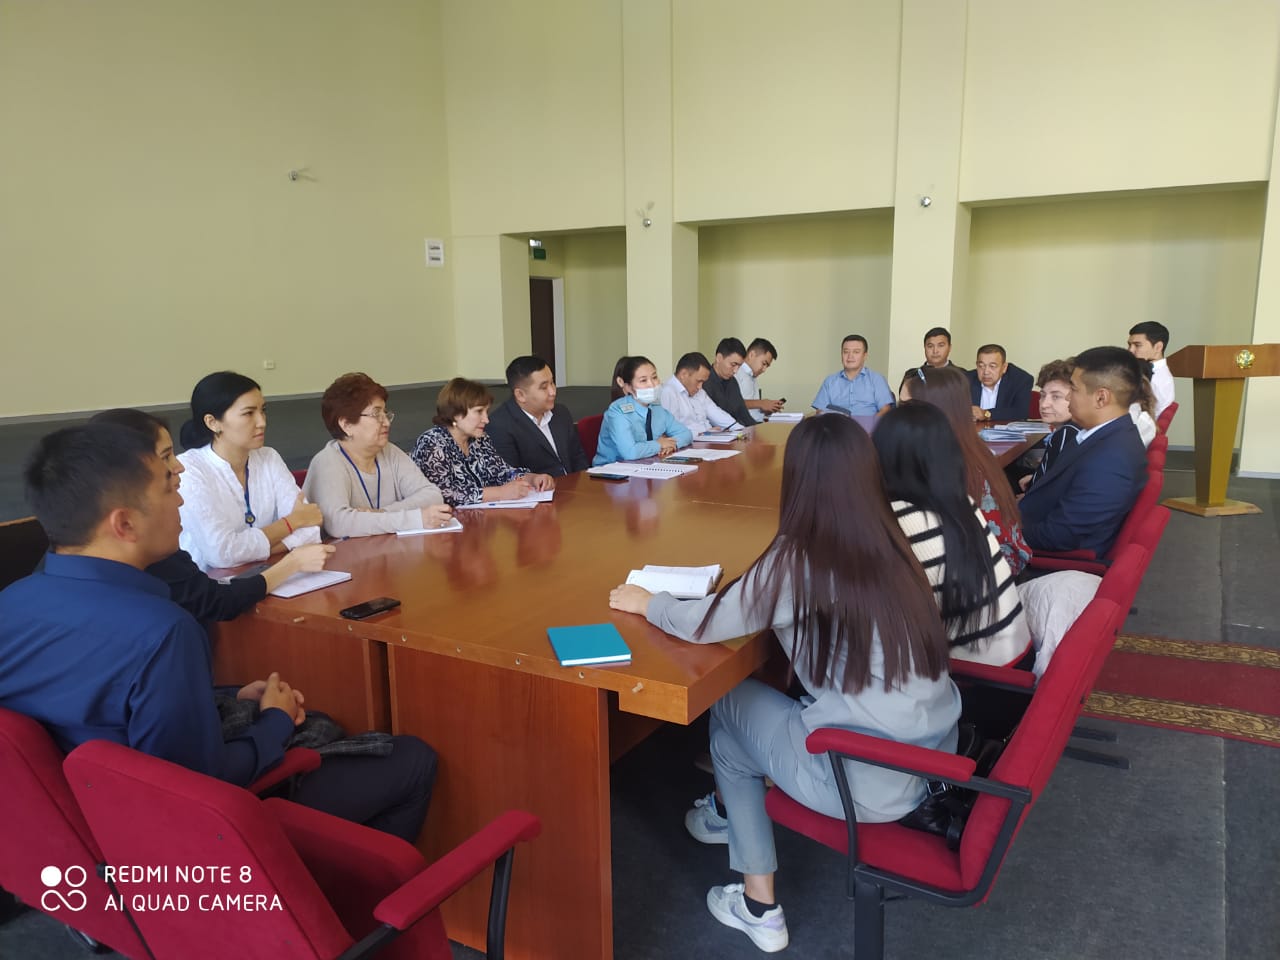 A lecture on "Compliance with the requirements of the Administrative Procedural Code of the Republic of Kazakhstan" was held among civil servants.